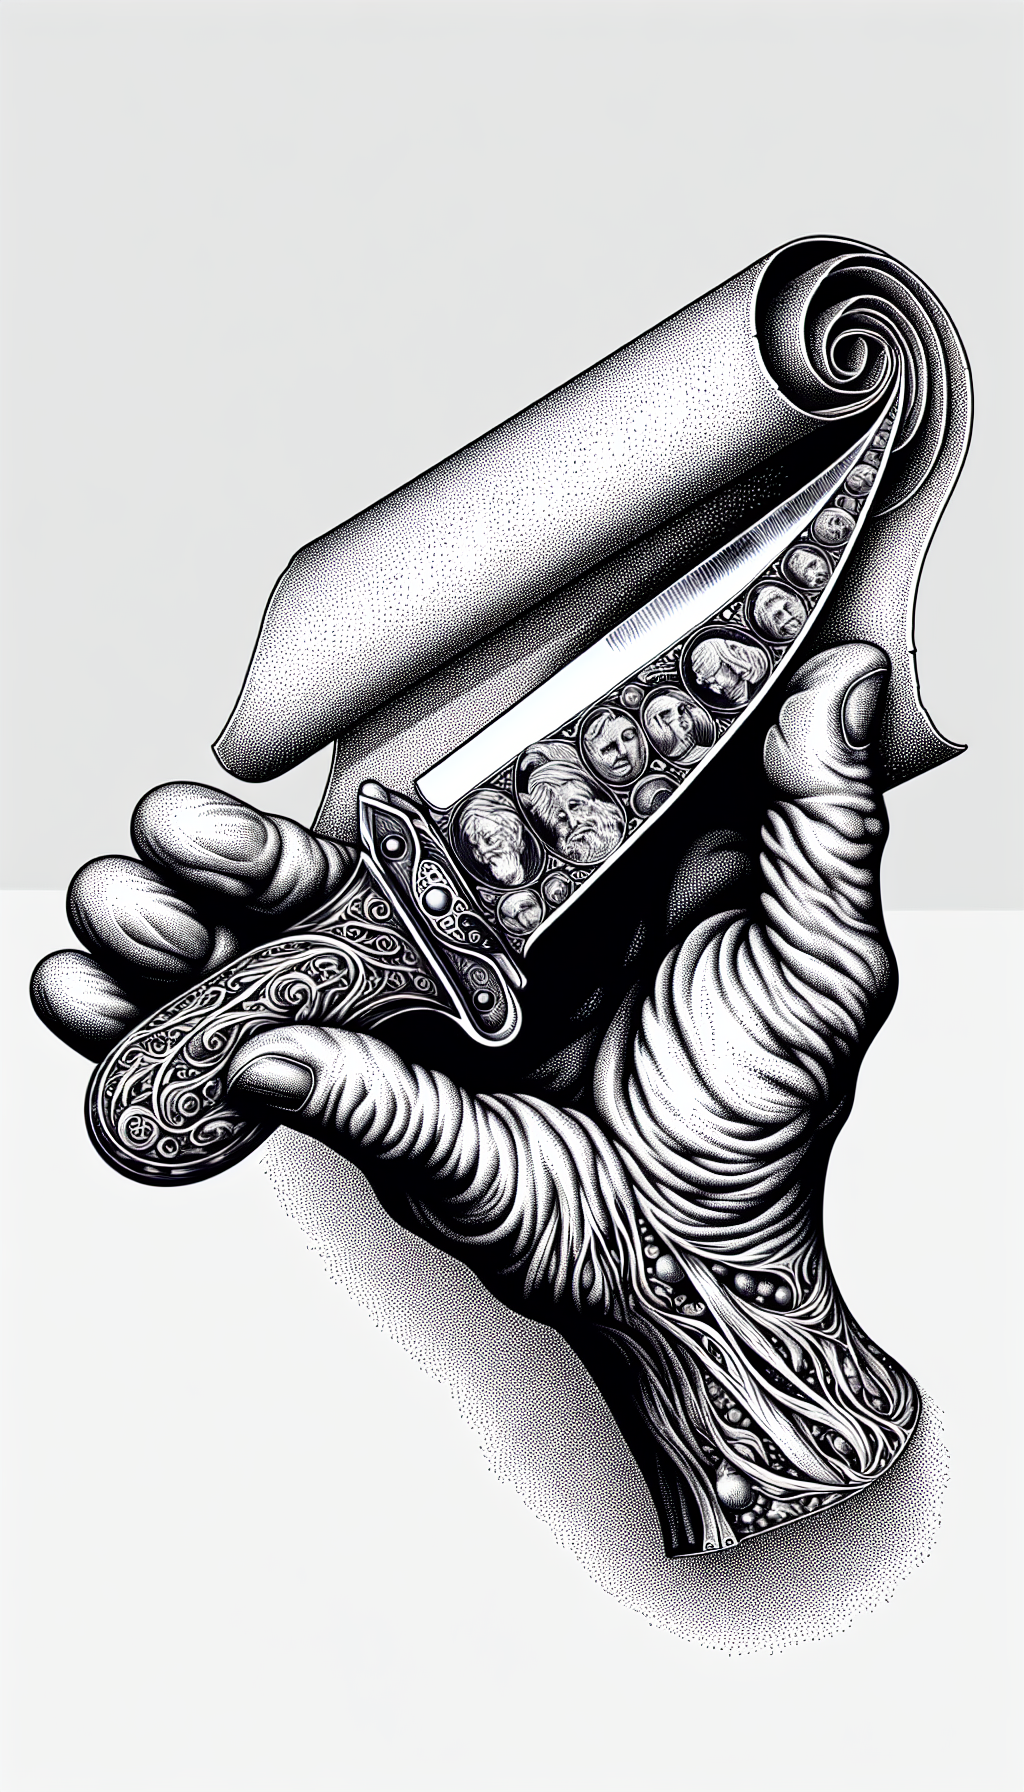 An intricately etched illustration showcases a majestic, weathered hand unfurling a scroll that transitions into a gleaming old-timer knife, with its blade reflecting key historical events. The textured handle bears monetary symbols, hinting at its growing vintage value, while the scroll's edge morphs into a timeline dotted with significant dates, artistically combining stippling with bold line art.